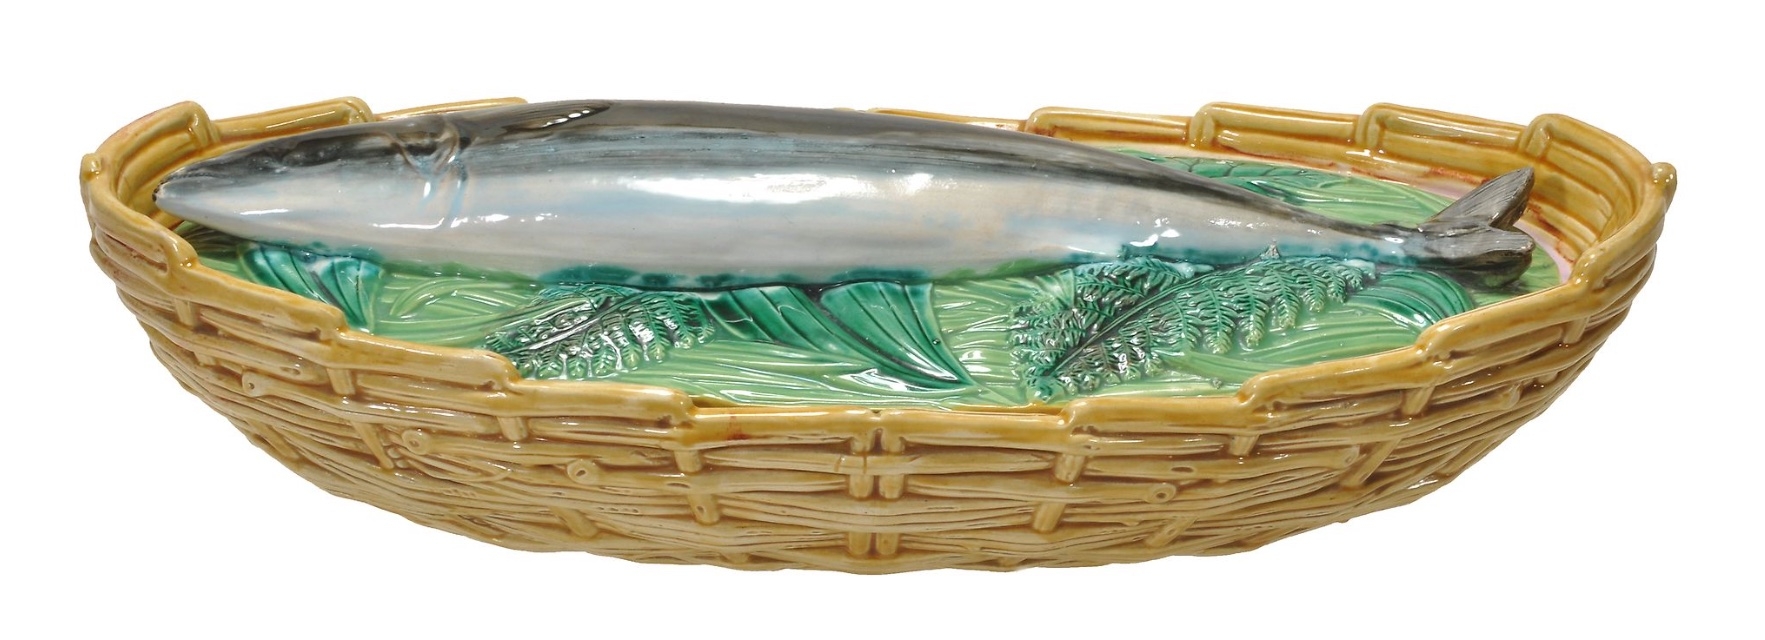 A George Jones majolica mackerel oval fish tureen and cover, circa 1871, with ochre ozier-moulded